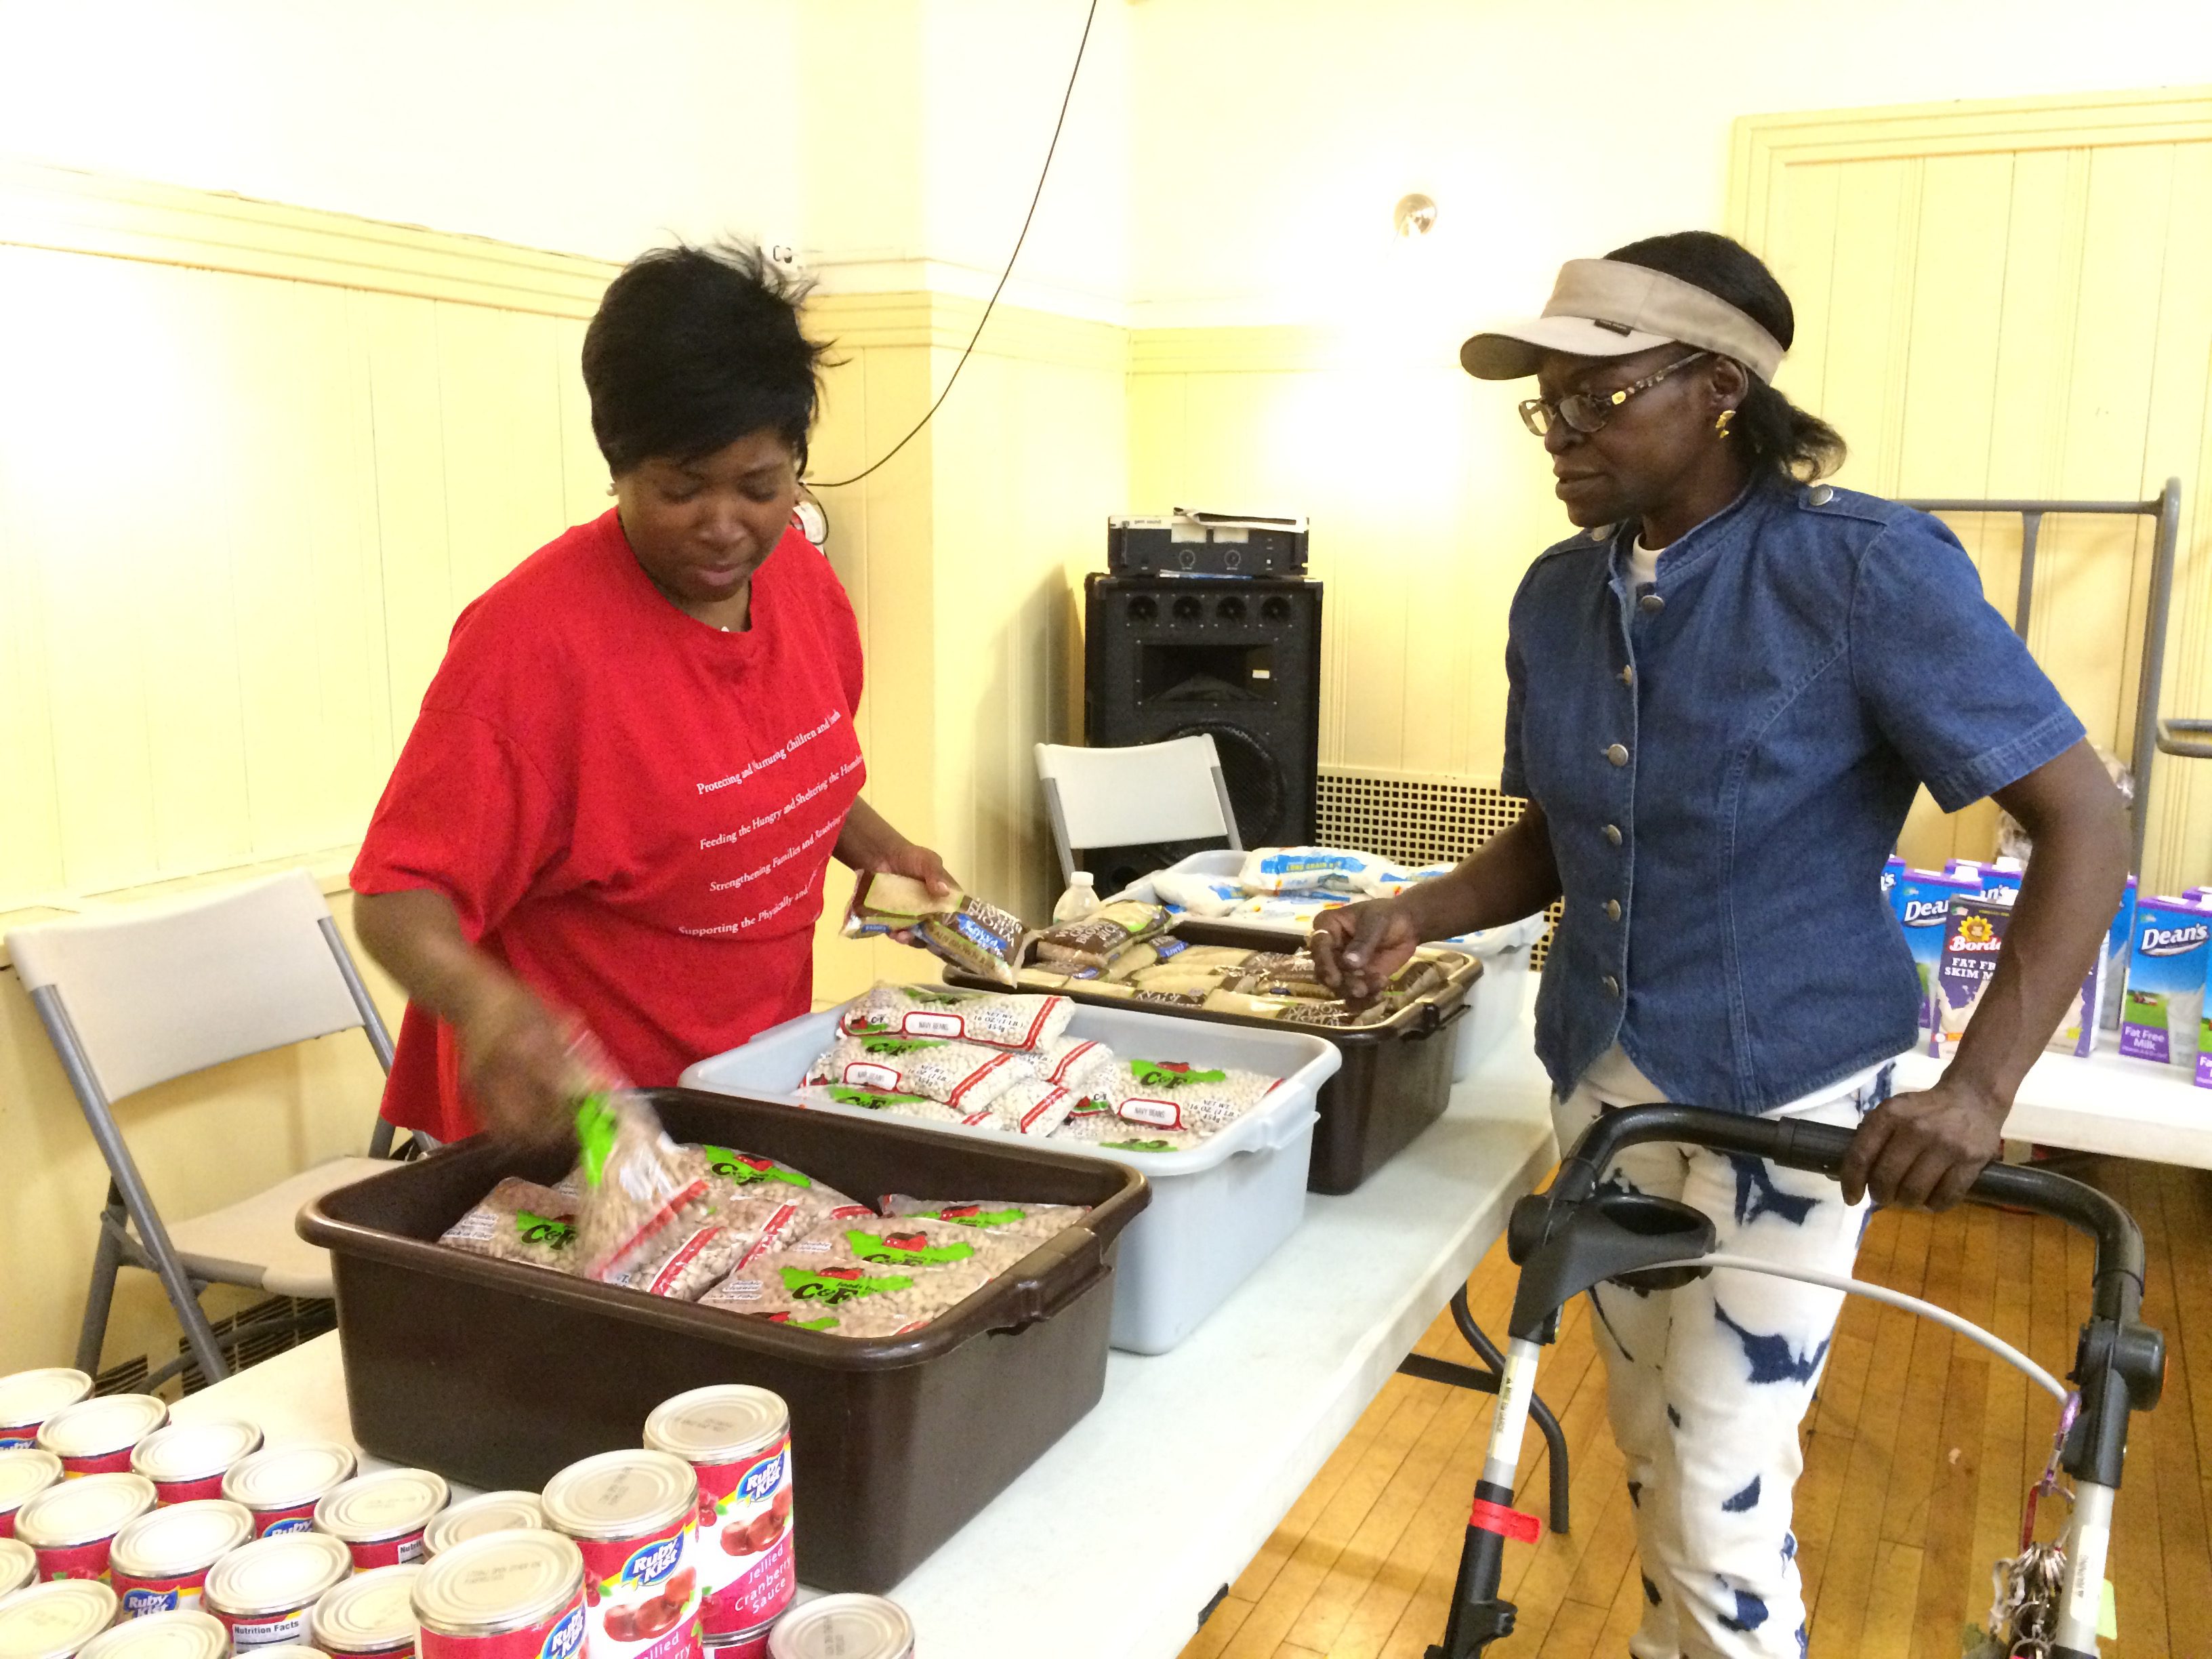 Susan La-Rose, right, visits the food pantry at Lt. Joseph P. Kennedy Community Center in Harlem. Margaret Tran/Bread for the World.